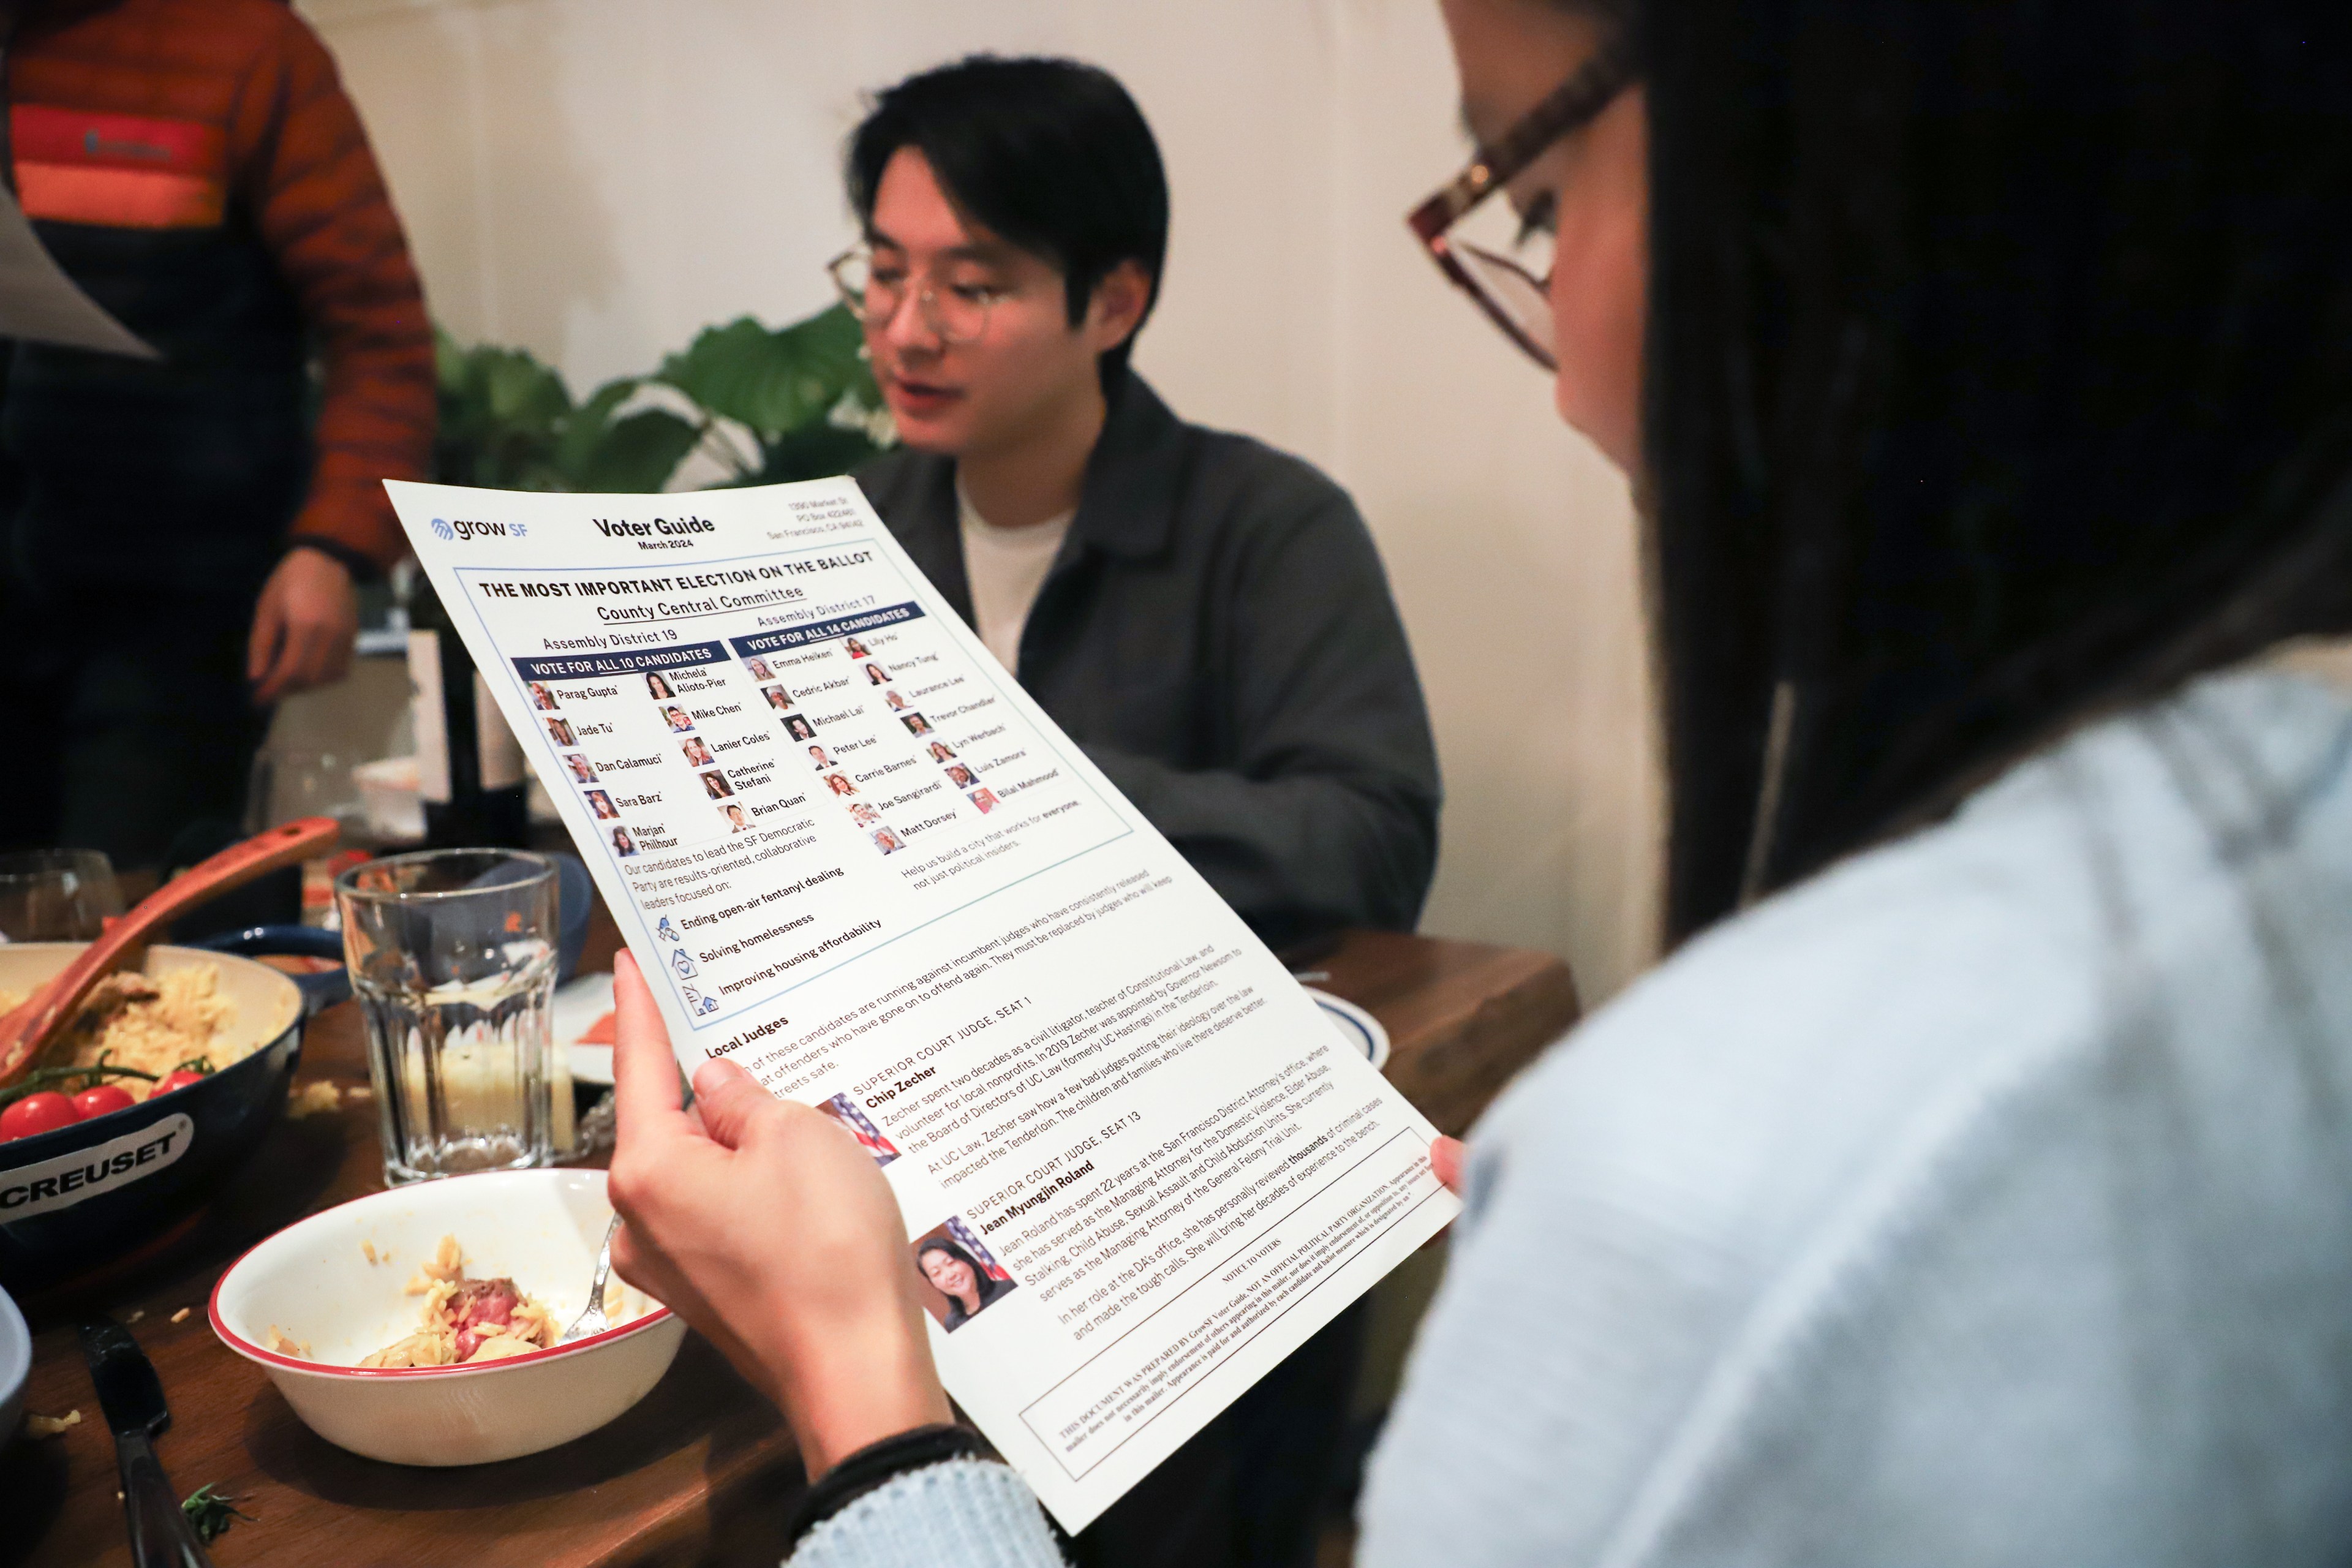 A person reads a voter guide at a table where others are engaged in discussion, with food and drinks present.